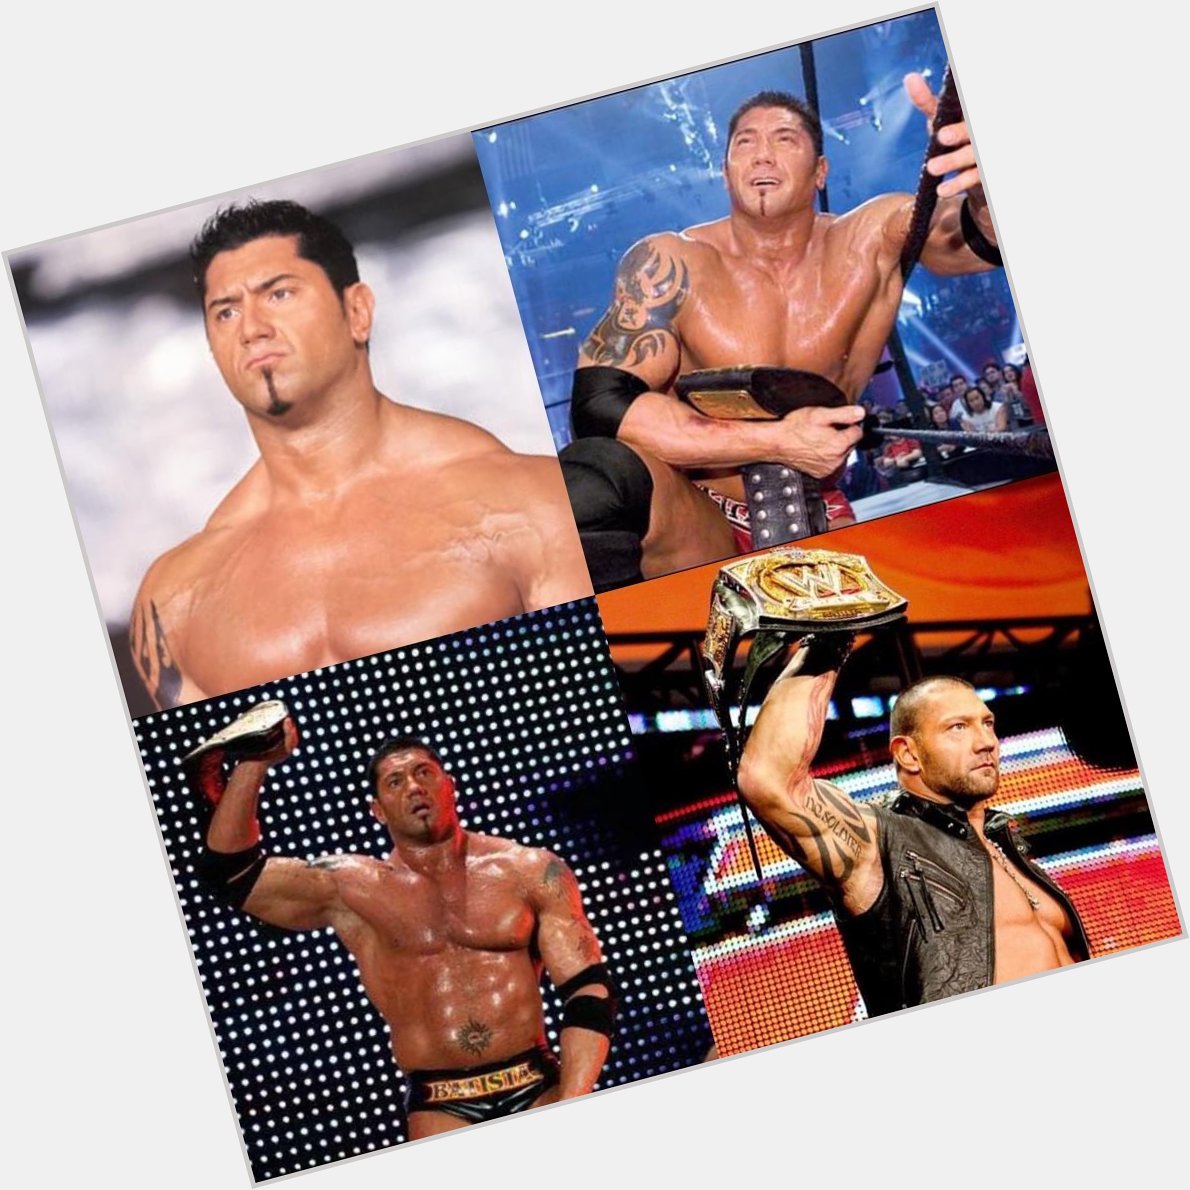  The Animal\" Batista turns 52 years old today!
Happy birthday 